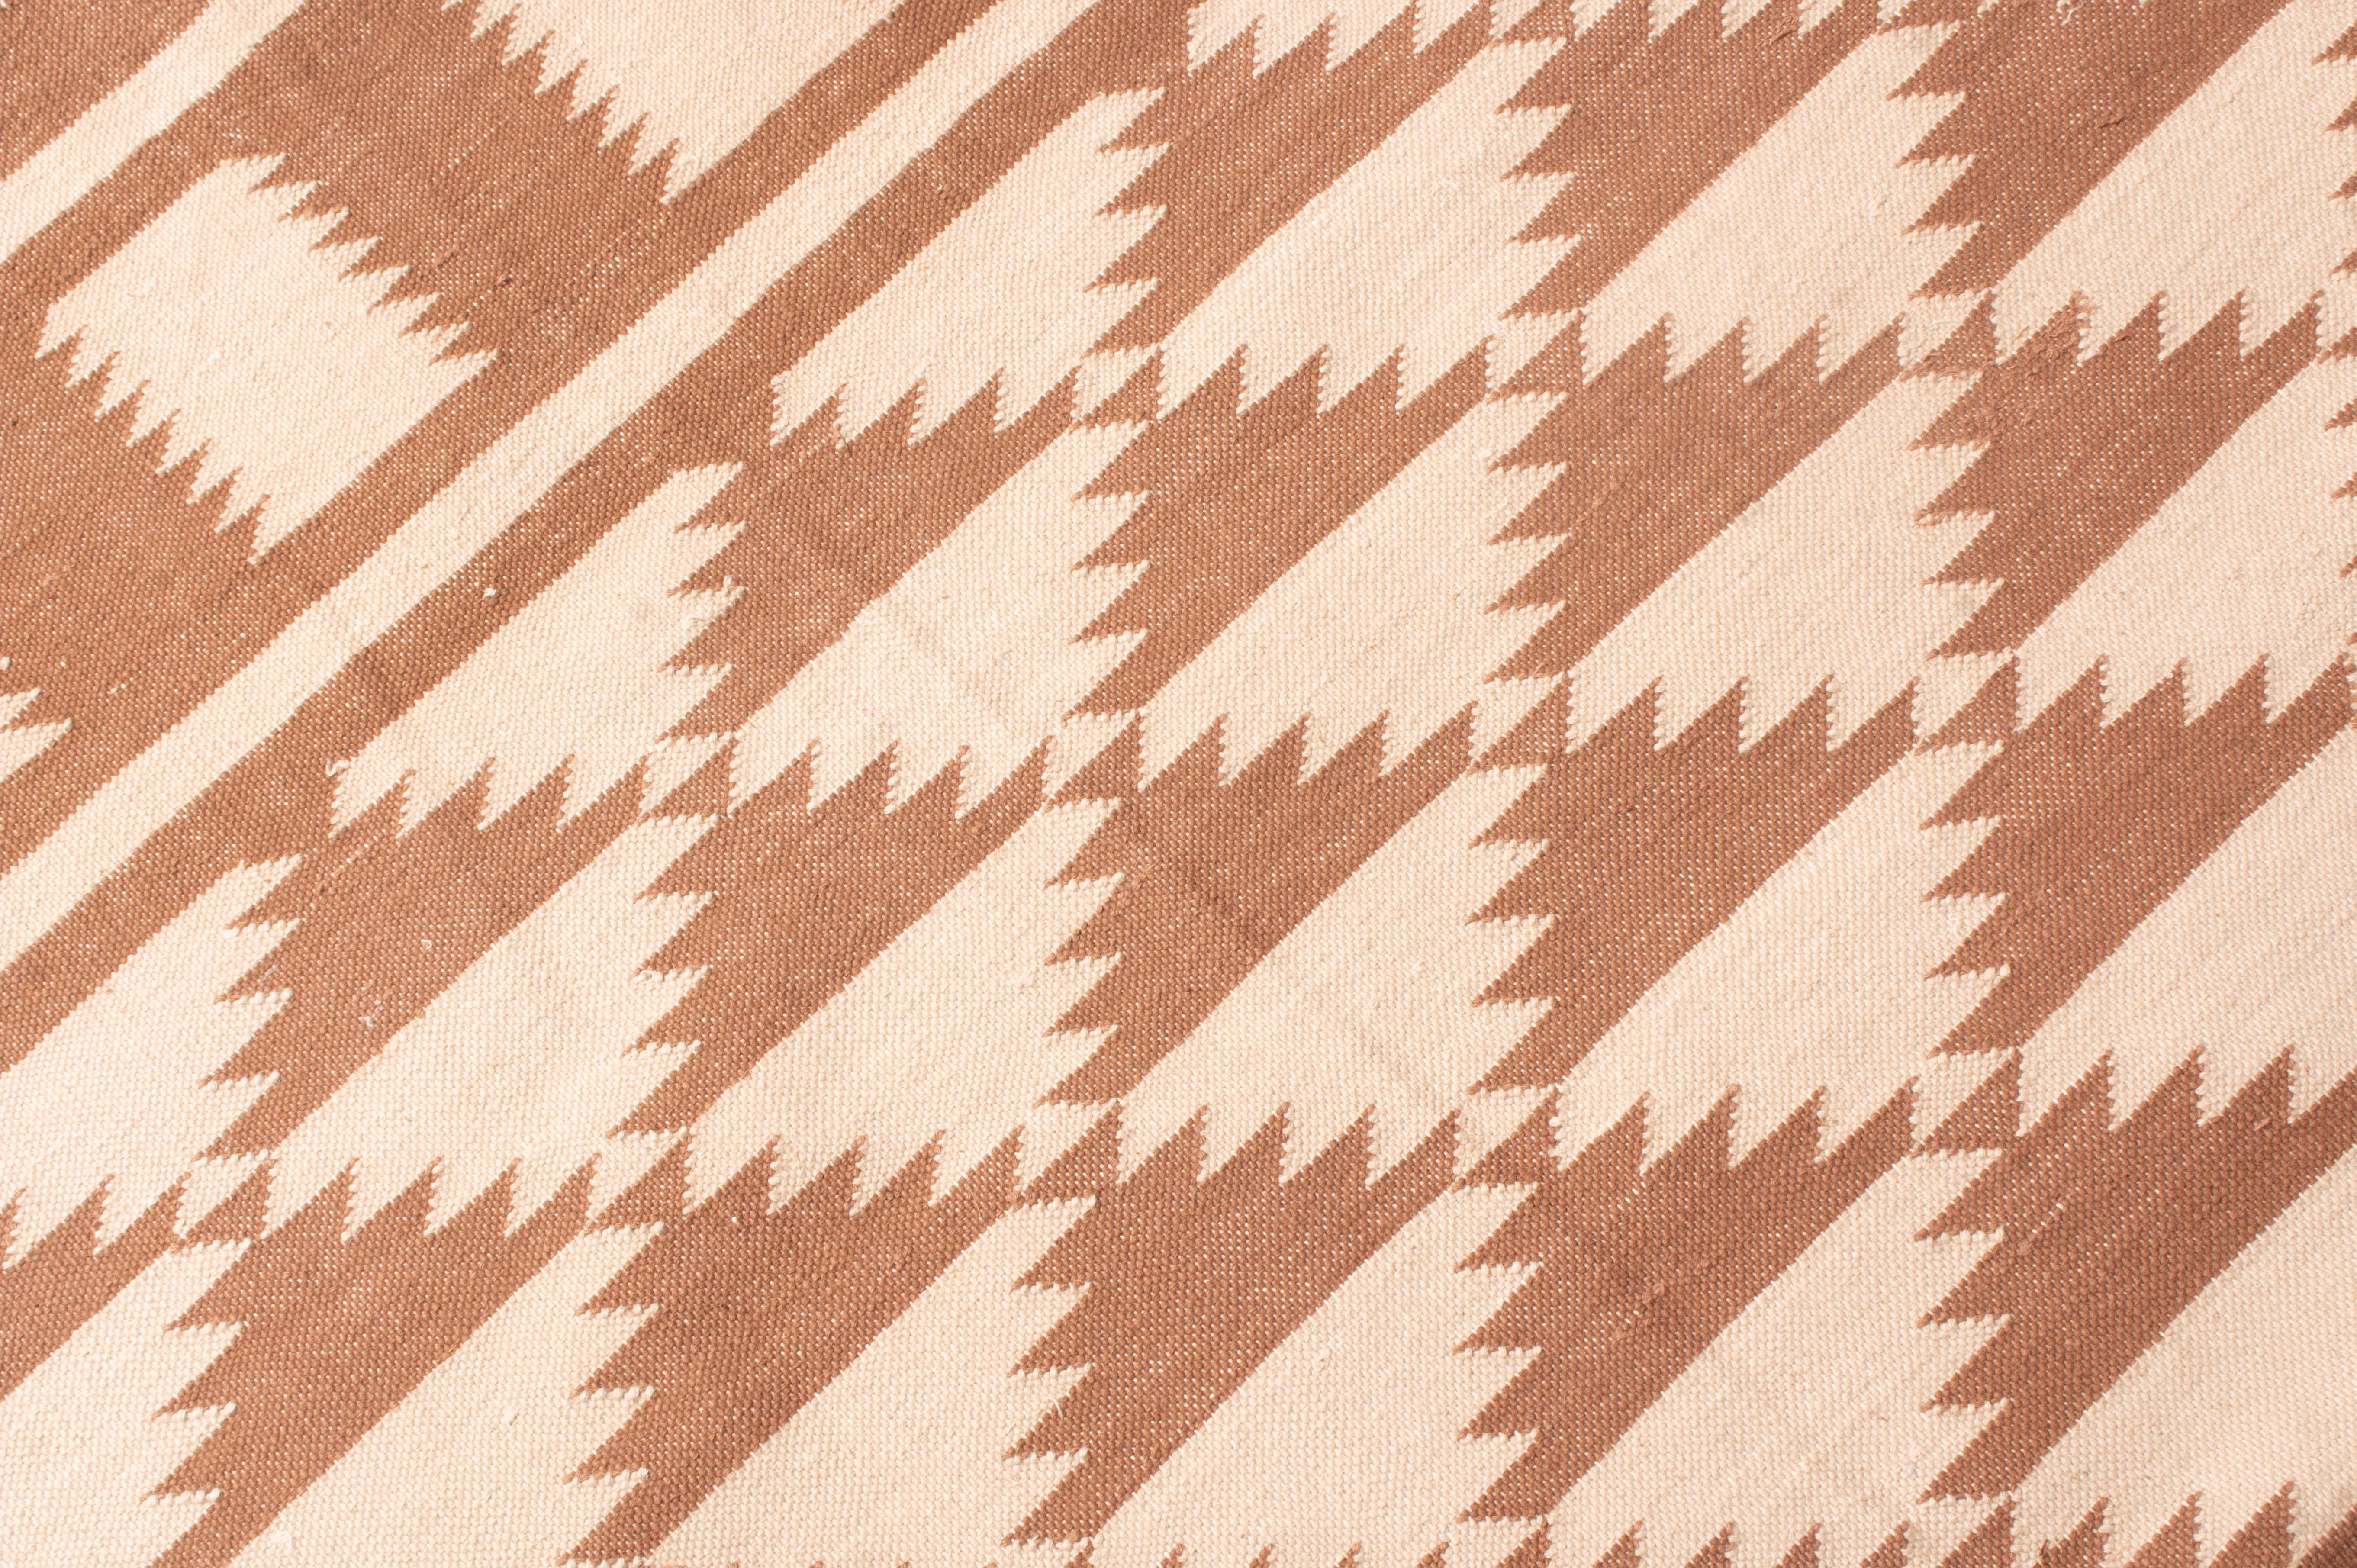 Modern New Geometric Brown and Beige Cotton Rug